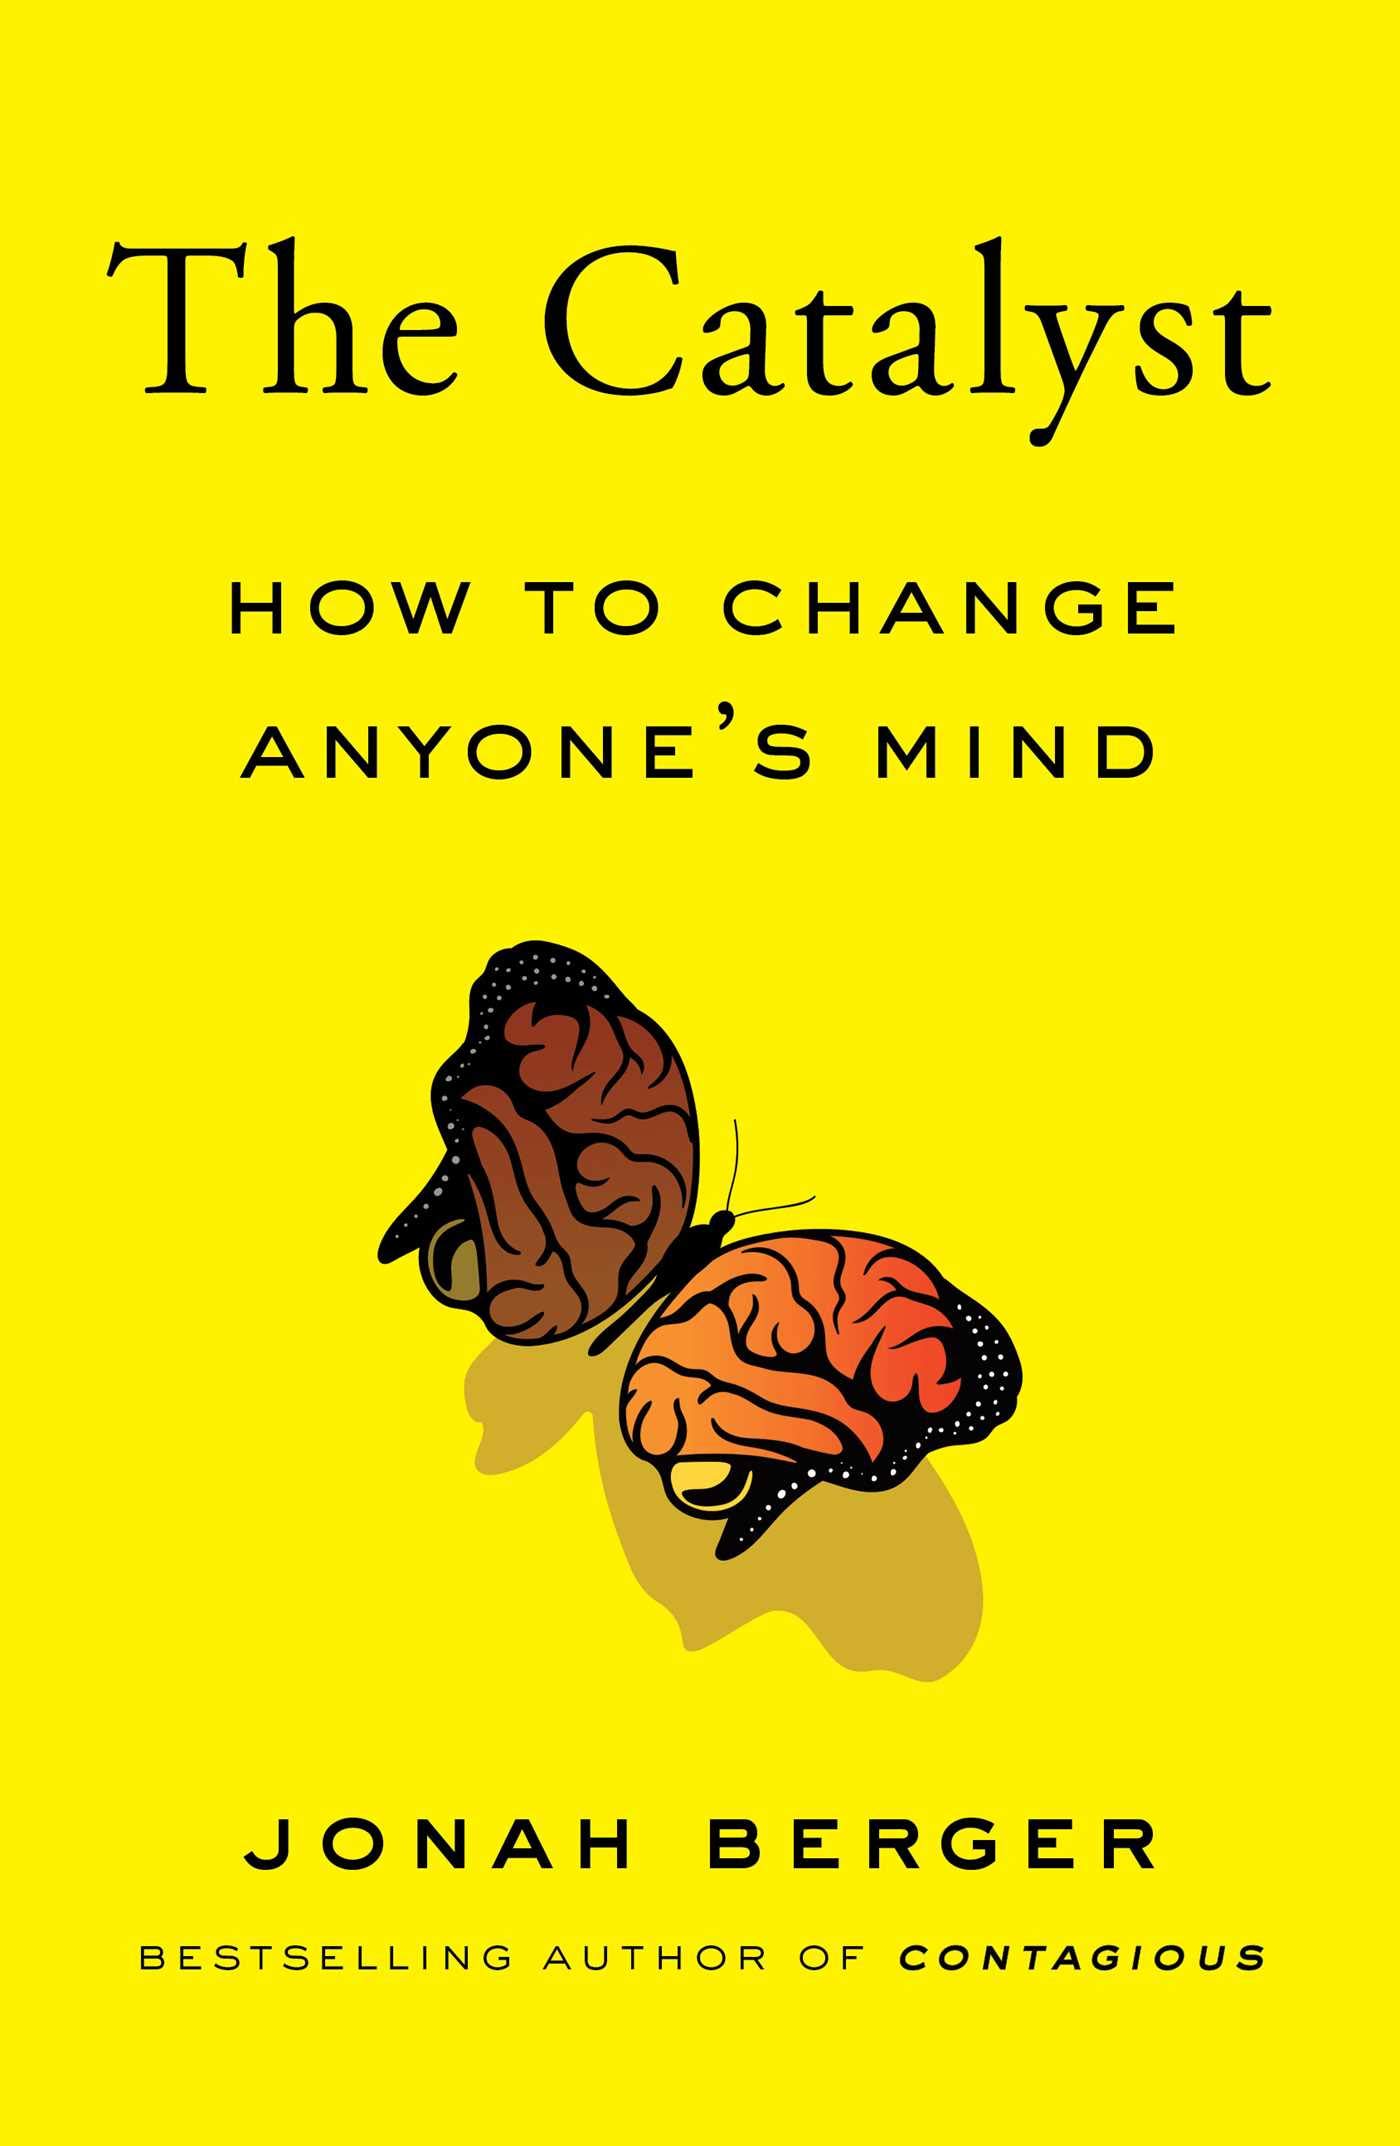 10 Best Books to Read about Human Psychology